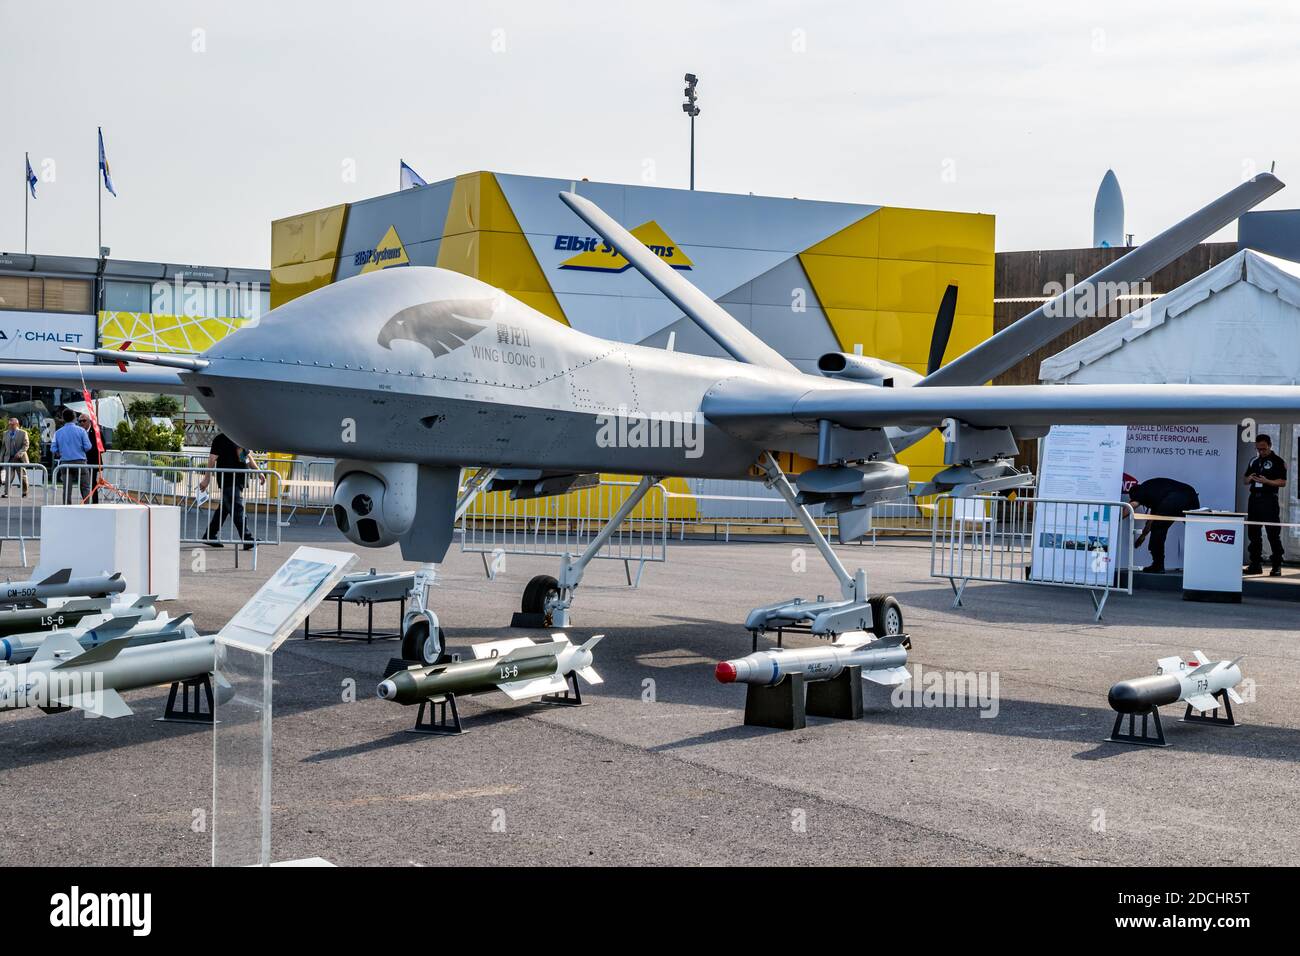 chinese-chengdu-aircraft-industry-group-caig-wing-loong-ii-military-uav-drone-showcased-at-the-paris-air-show-france-jun-22-2017-2DCHR5T.jpg